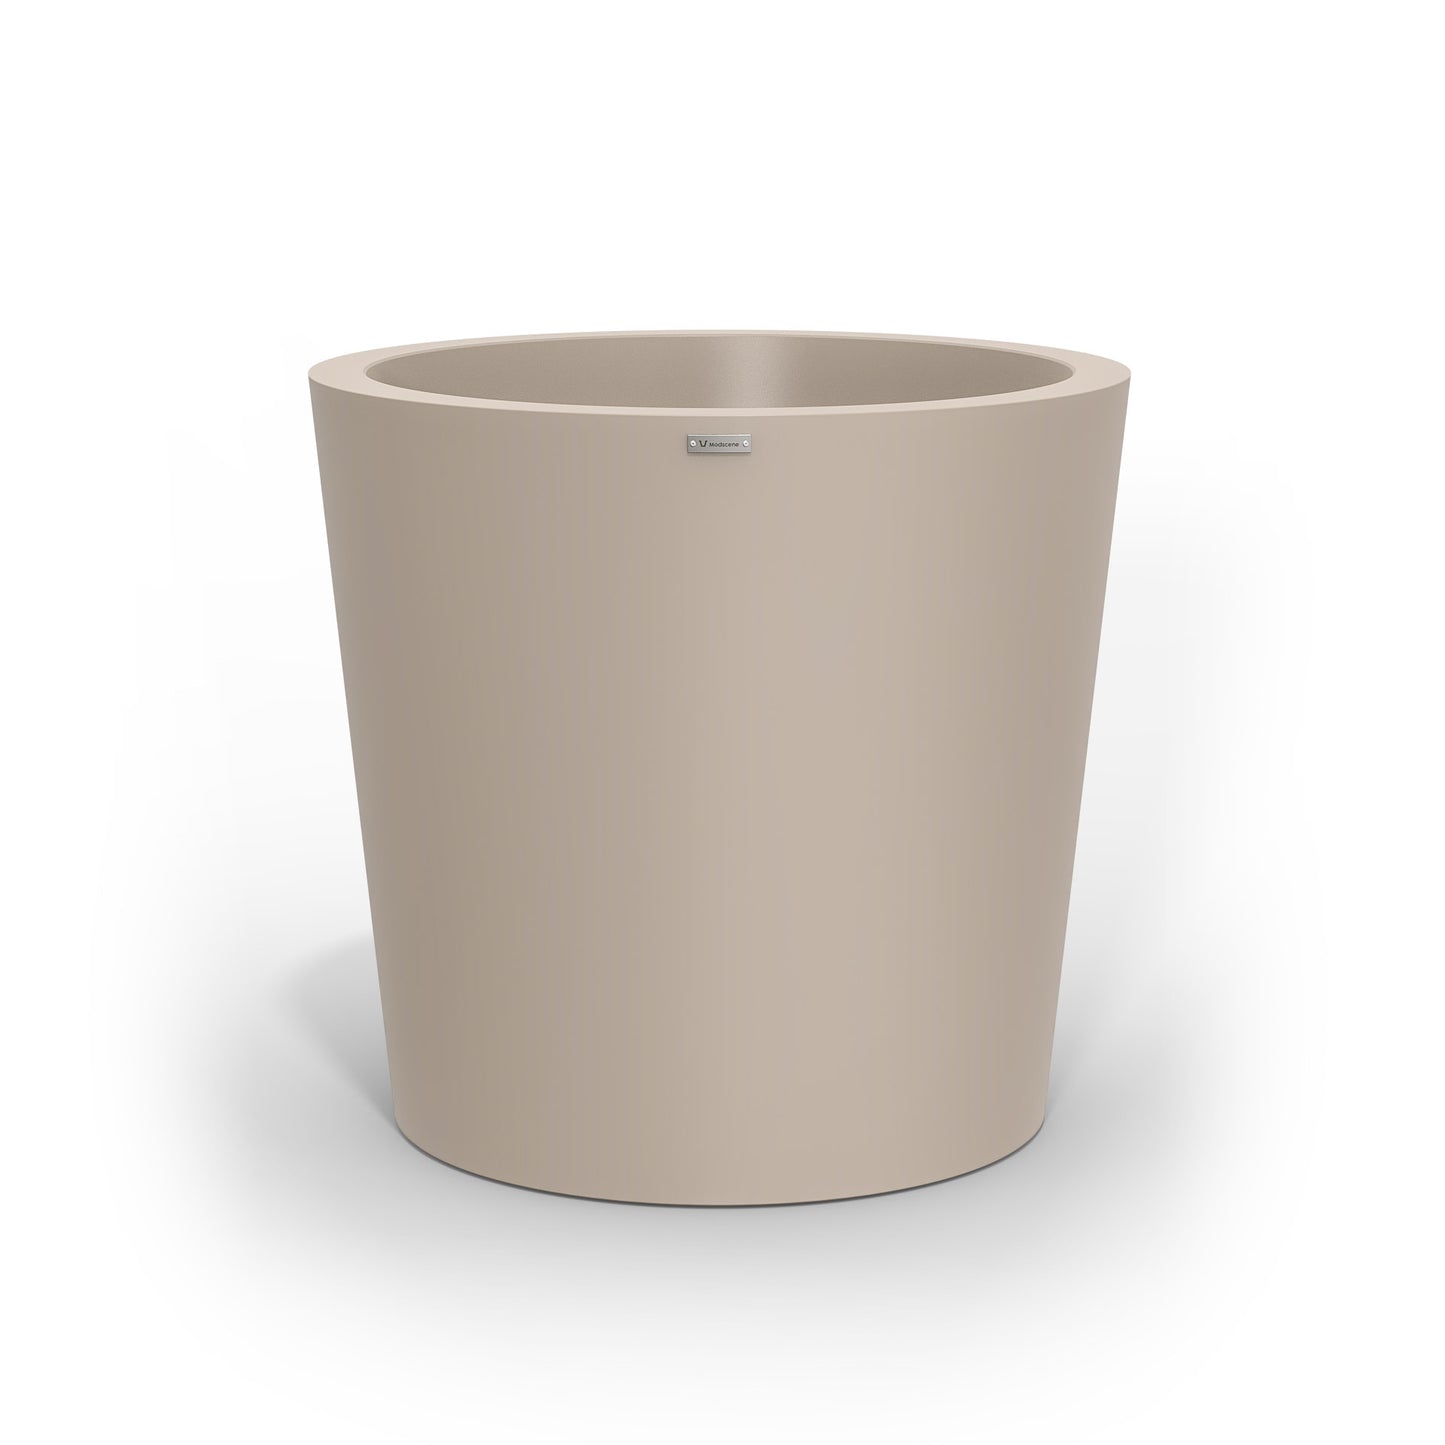 A large Modscene pot planter in a sand stone colour.